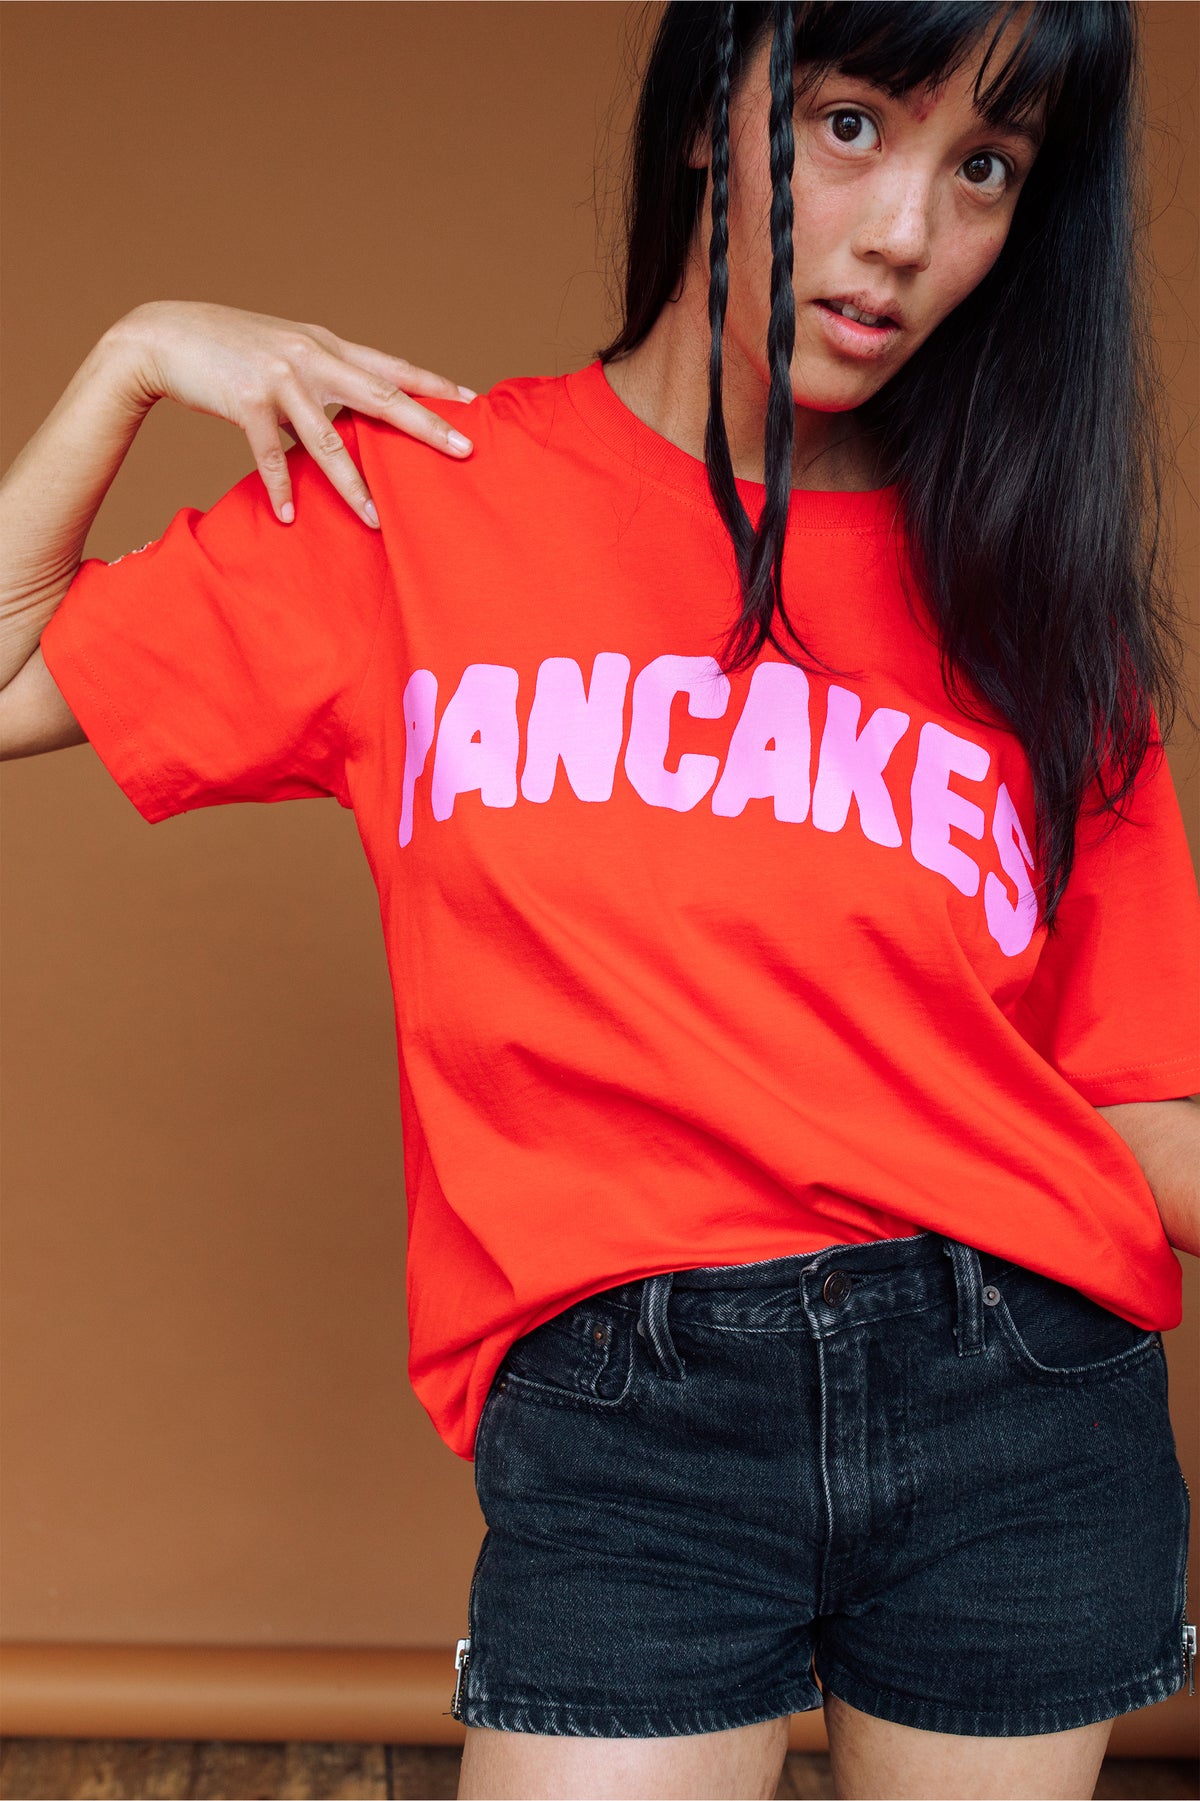 Pancakes Luxe Embroidered T-Shirt